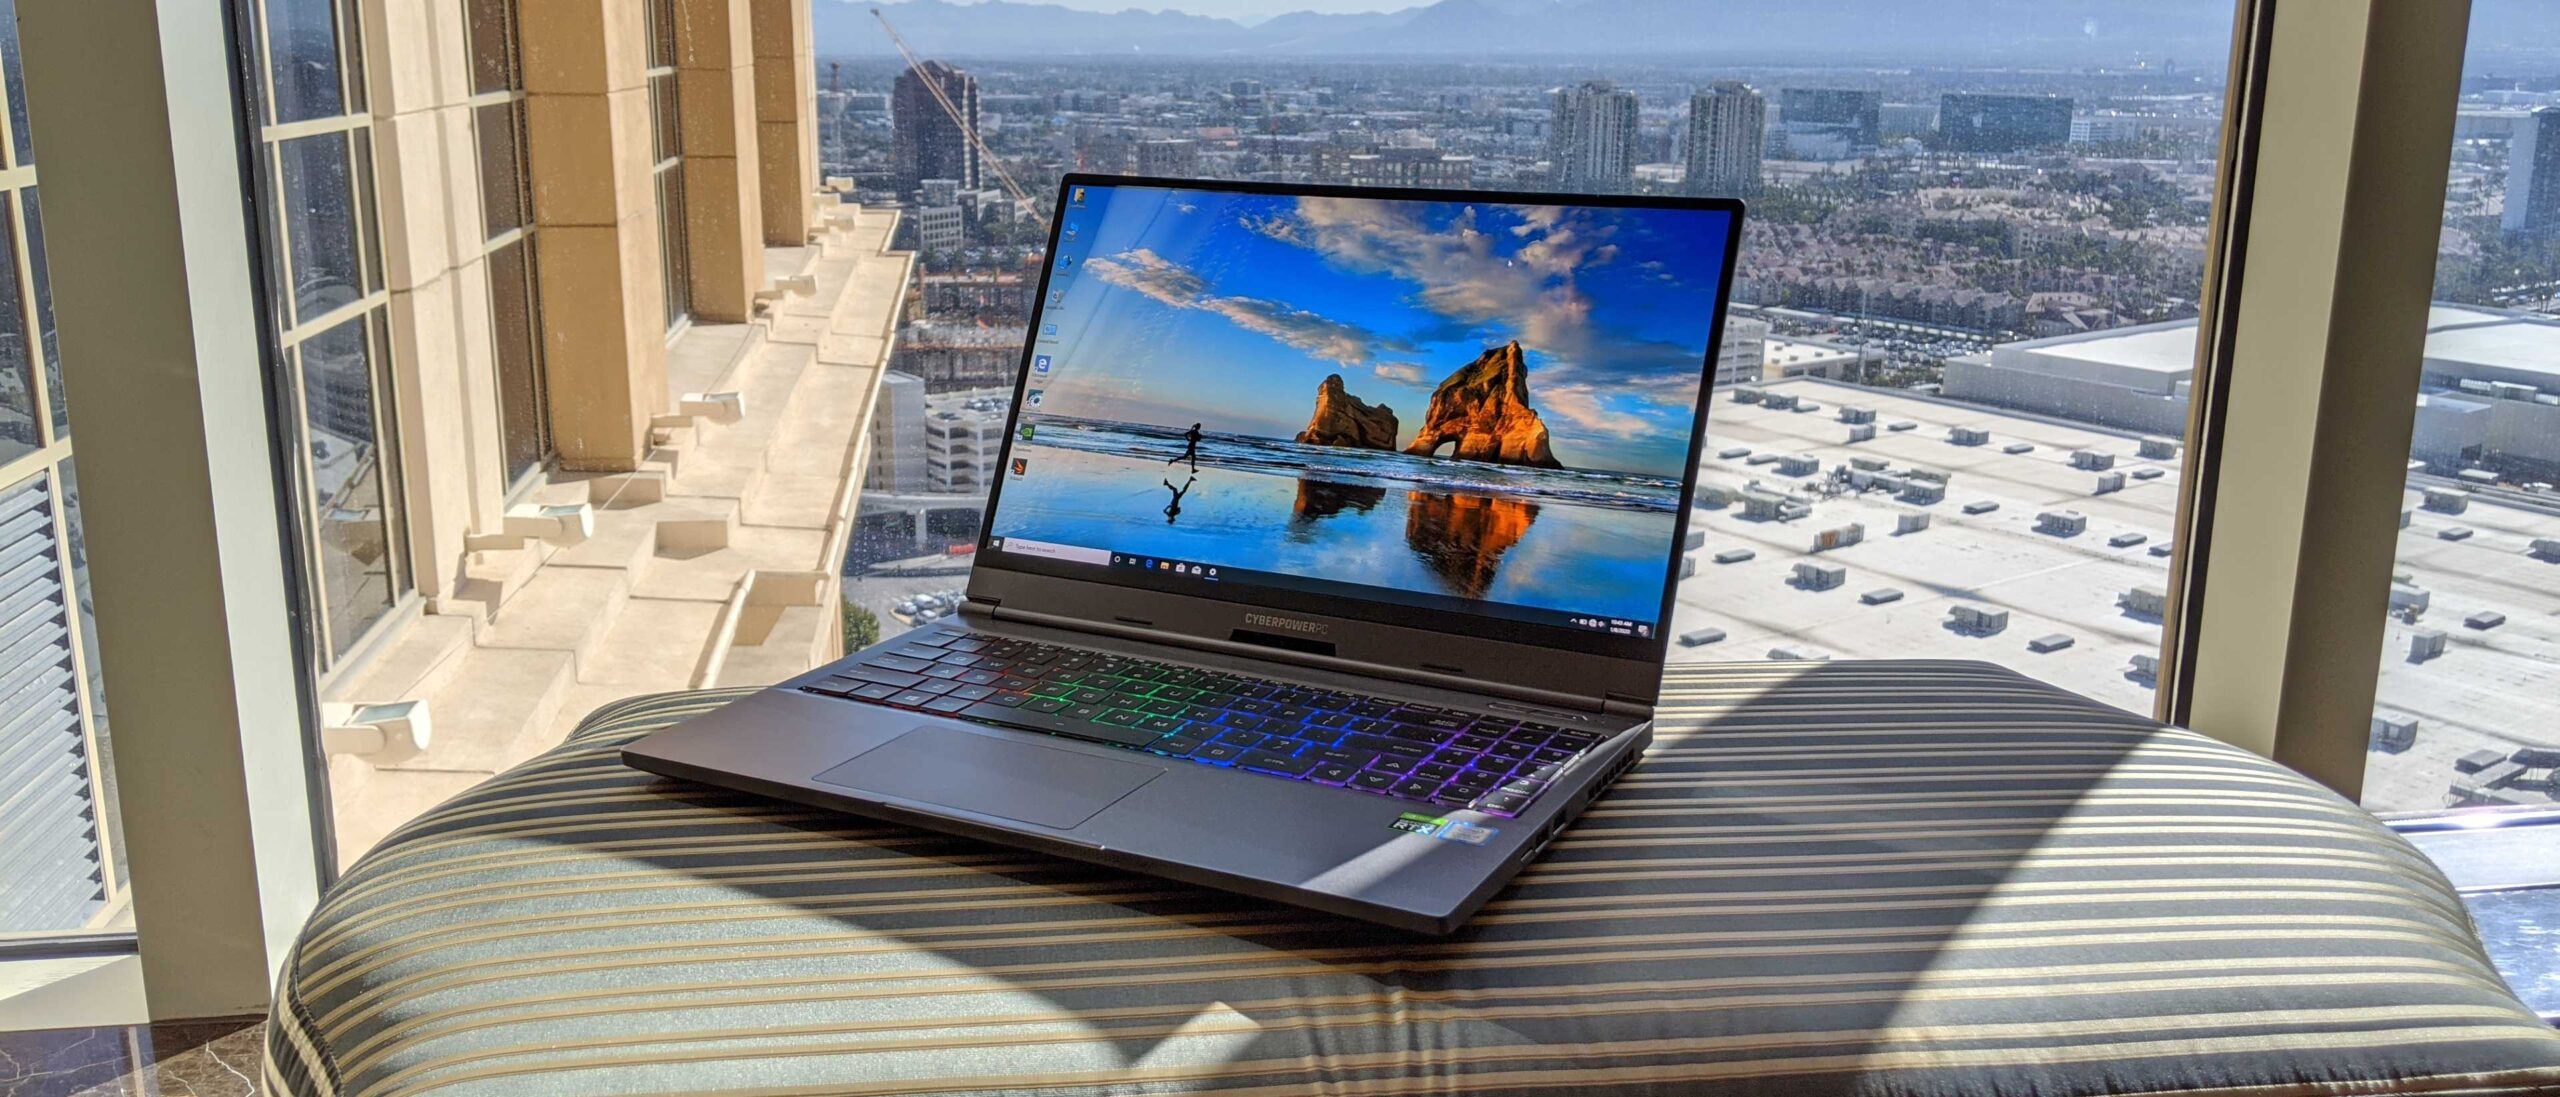 How to Improve Your Gaming Laptop's Battery Life